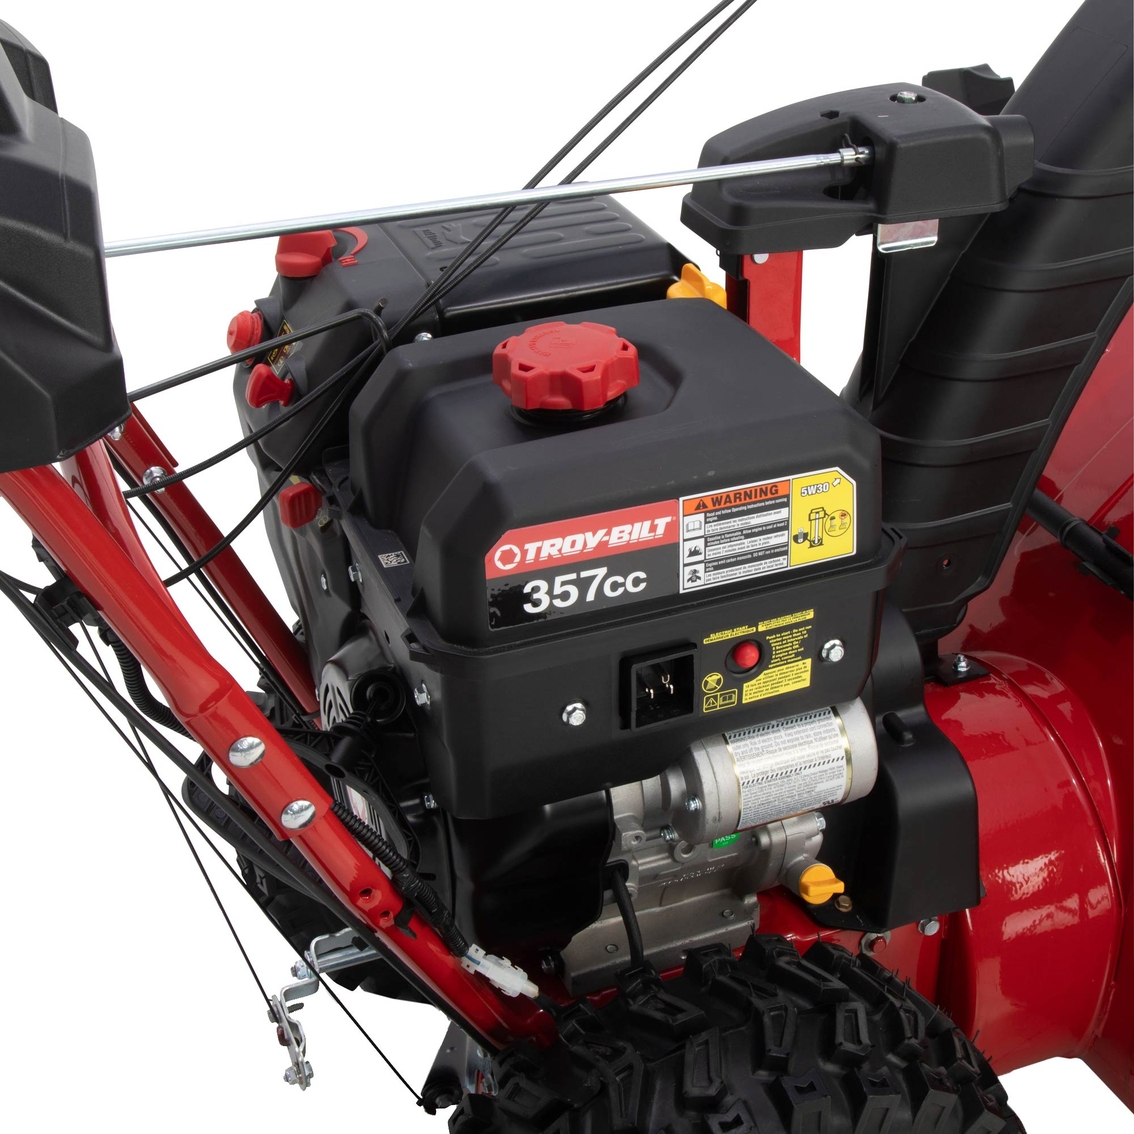 Troy-Bilt Storm 3090 2 Stage 30 in. Snowthrower - Image 6 of 8